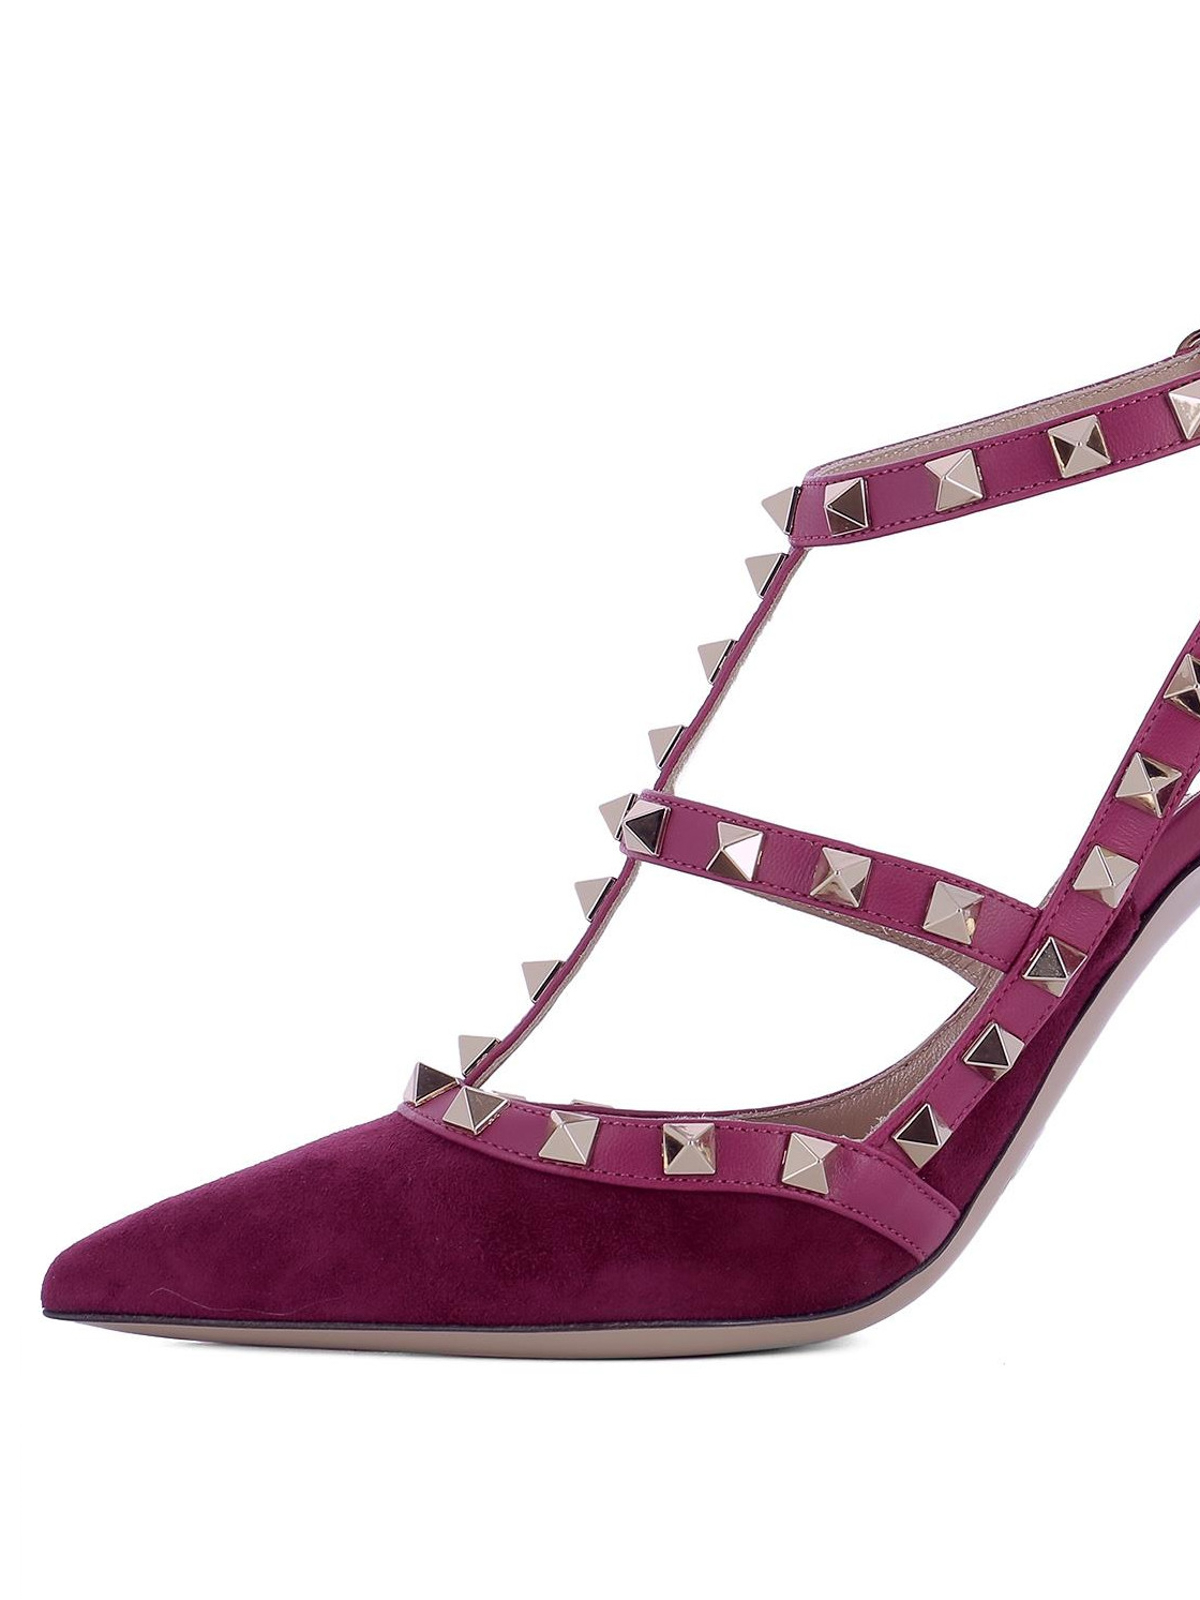 purple valentino shoes,OFF 56%,www.concordehotels.com.tr